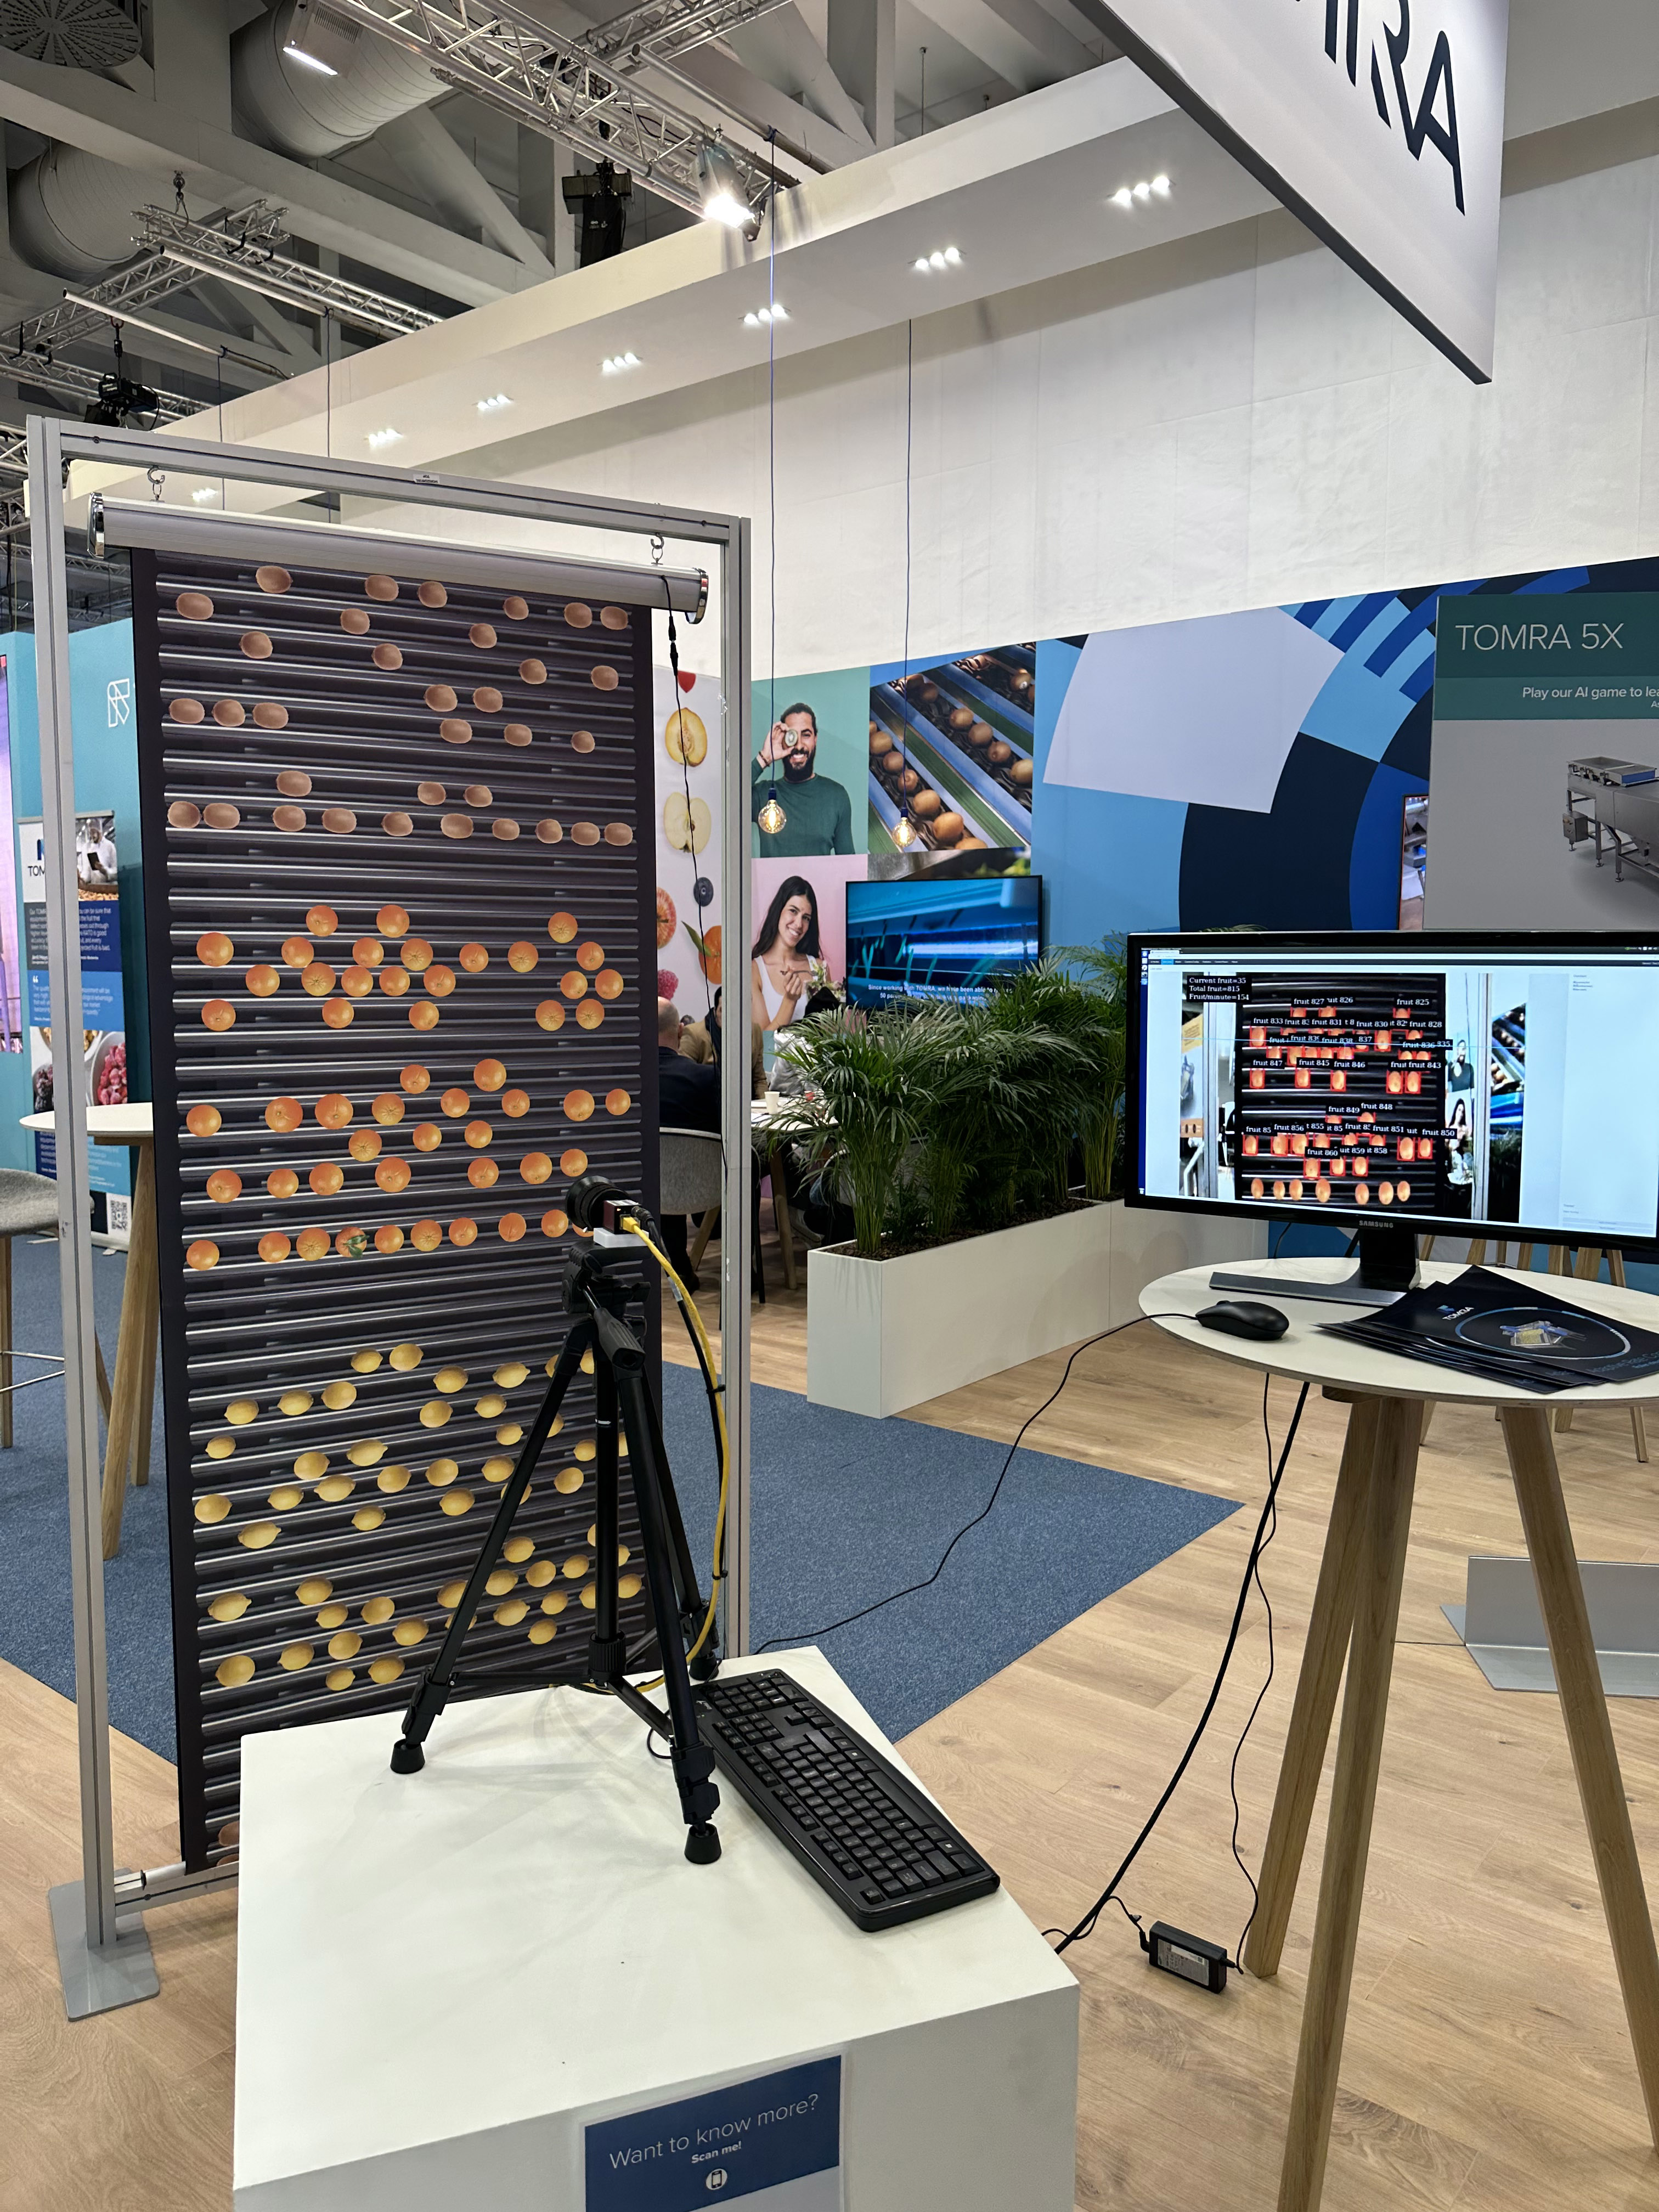 TOMRA Food SPOTLIGHTS ARTIFICIAL INTELLIGENCE AND DEMONSTRATES SORTING, GRADING, AND PACKING SOLUTIONS AT FRUIT LOGISTICA BERLIN